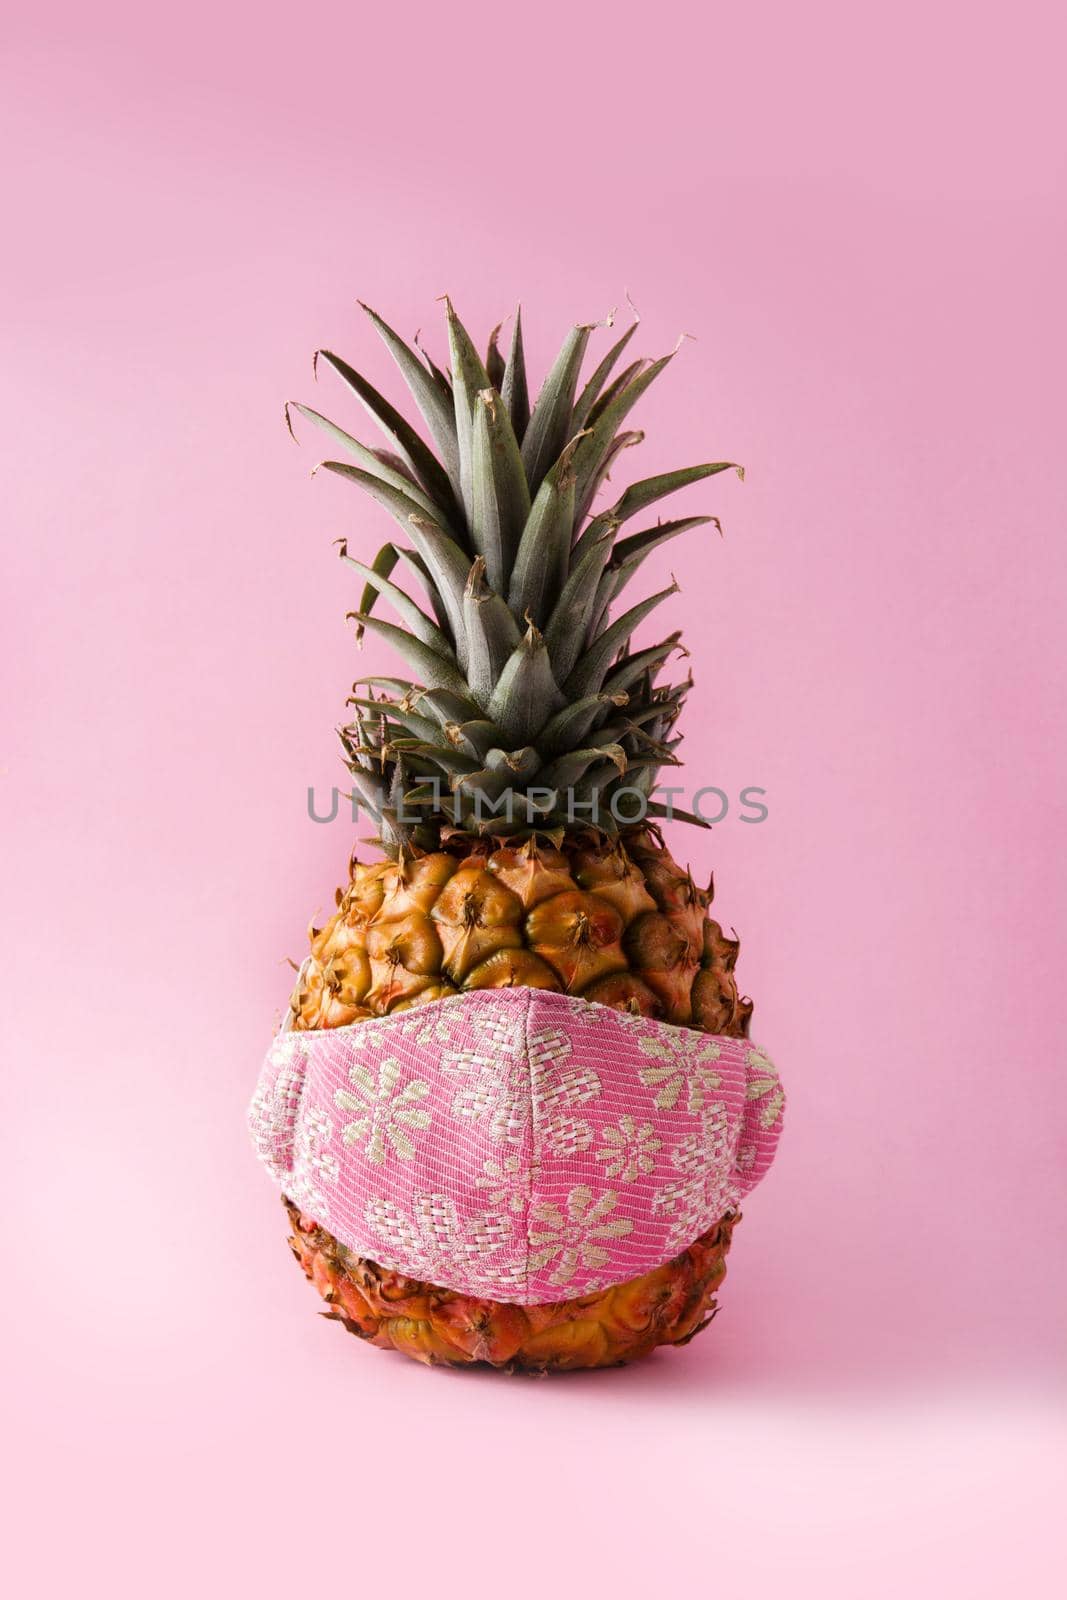 Pineapple with protective face mask on pink background